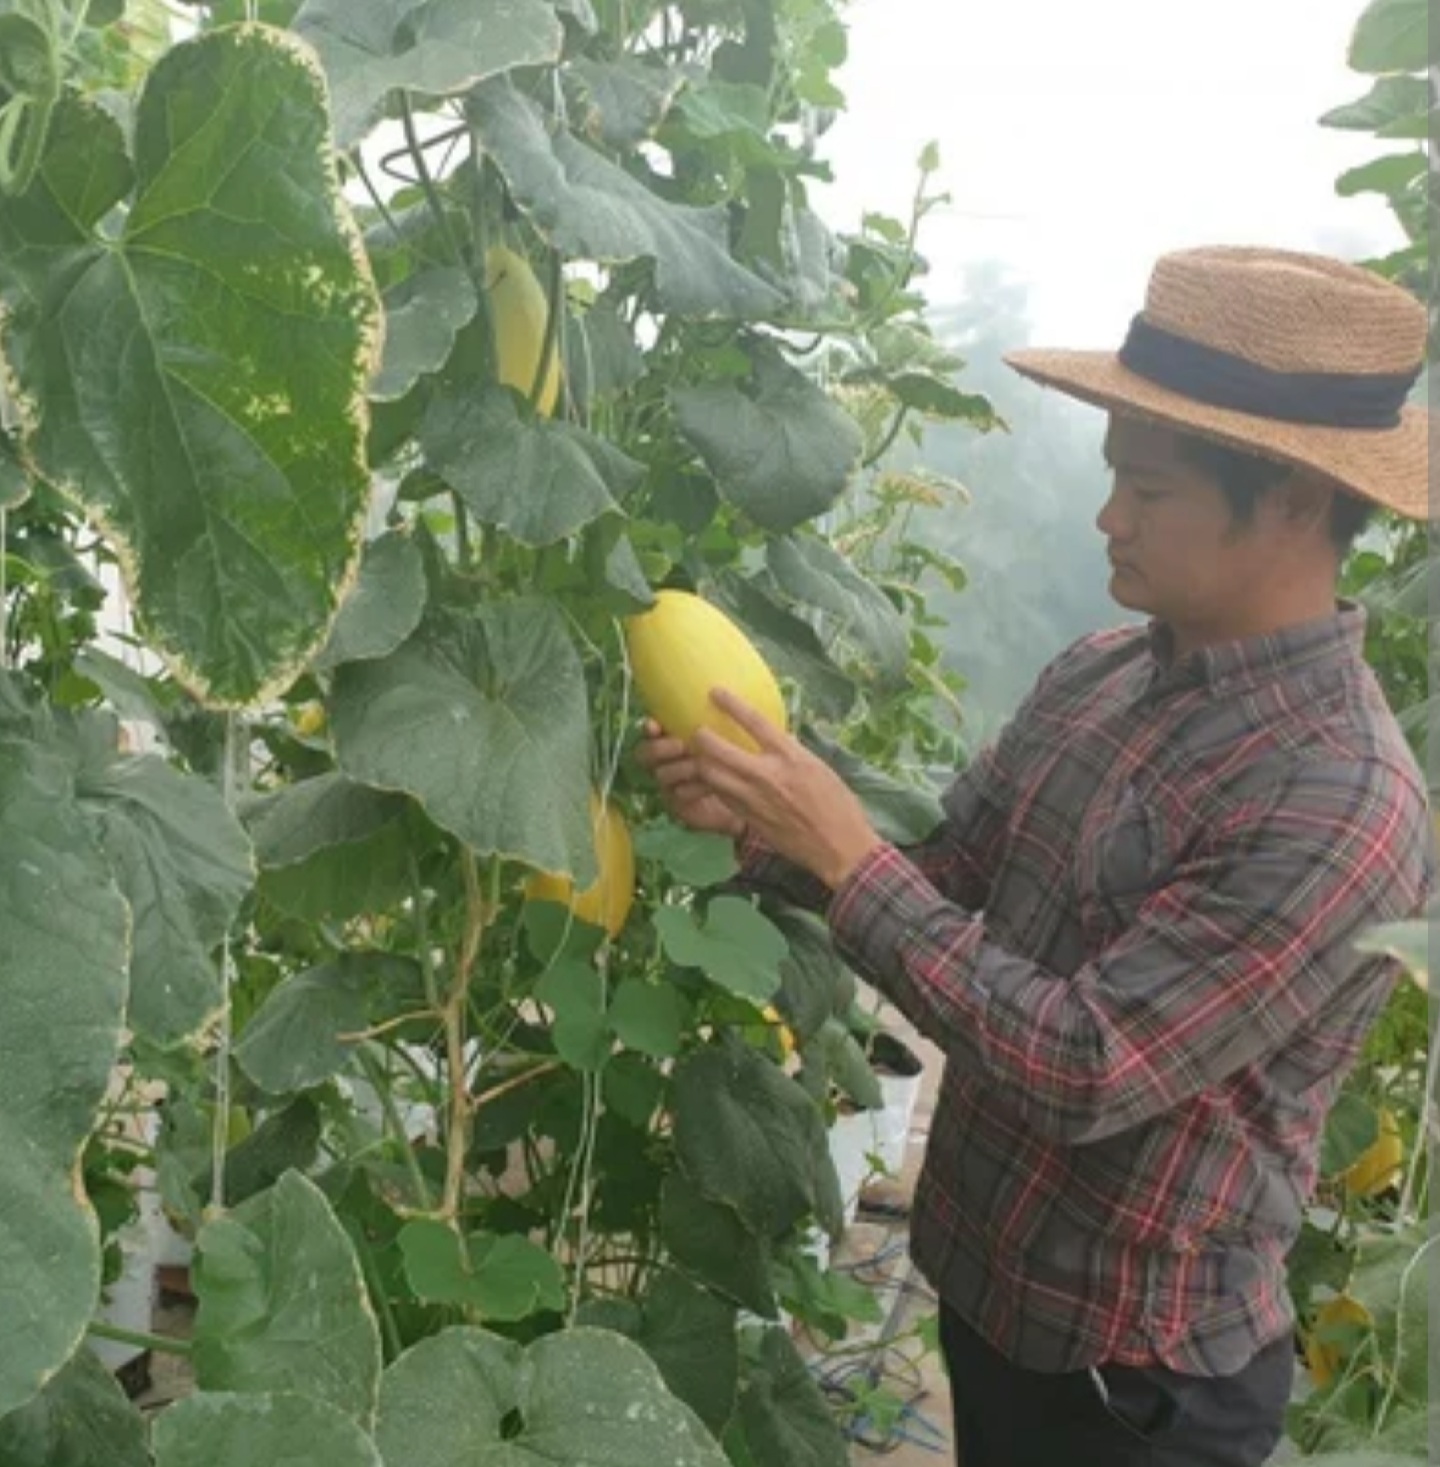 In export-dependent Vietnam, Covid-19 is eating into the food and agriculture sector